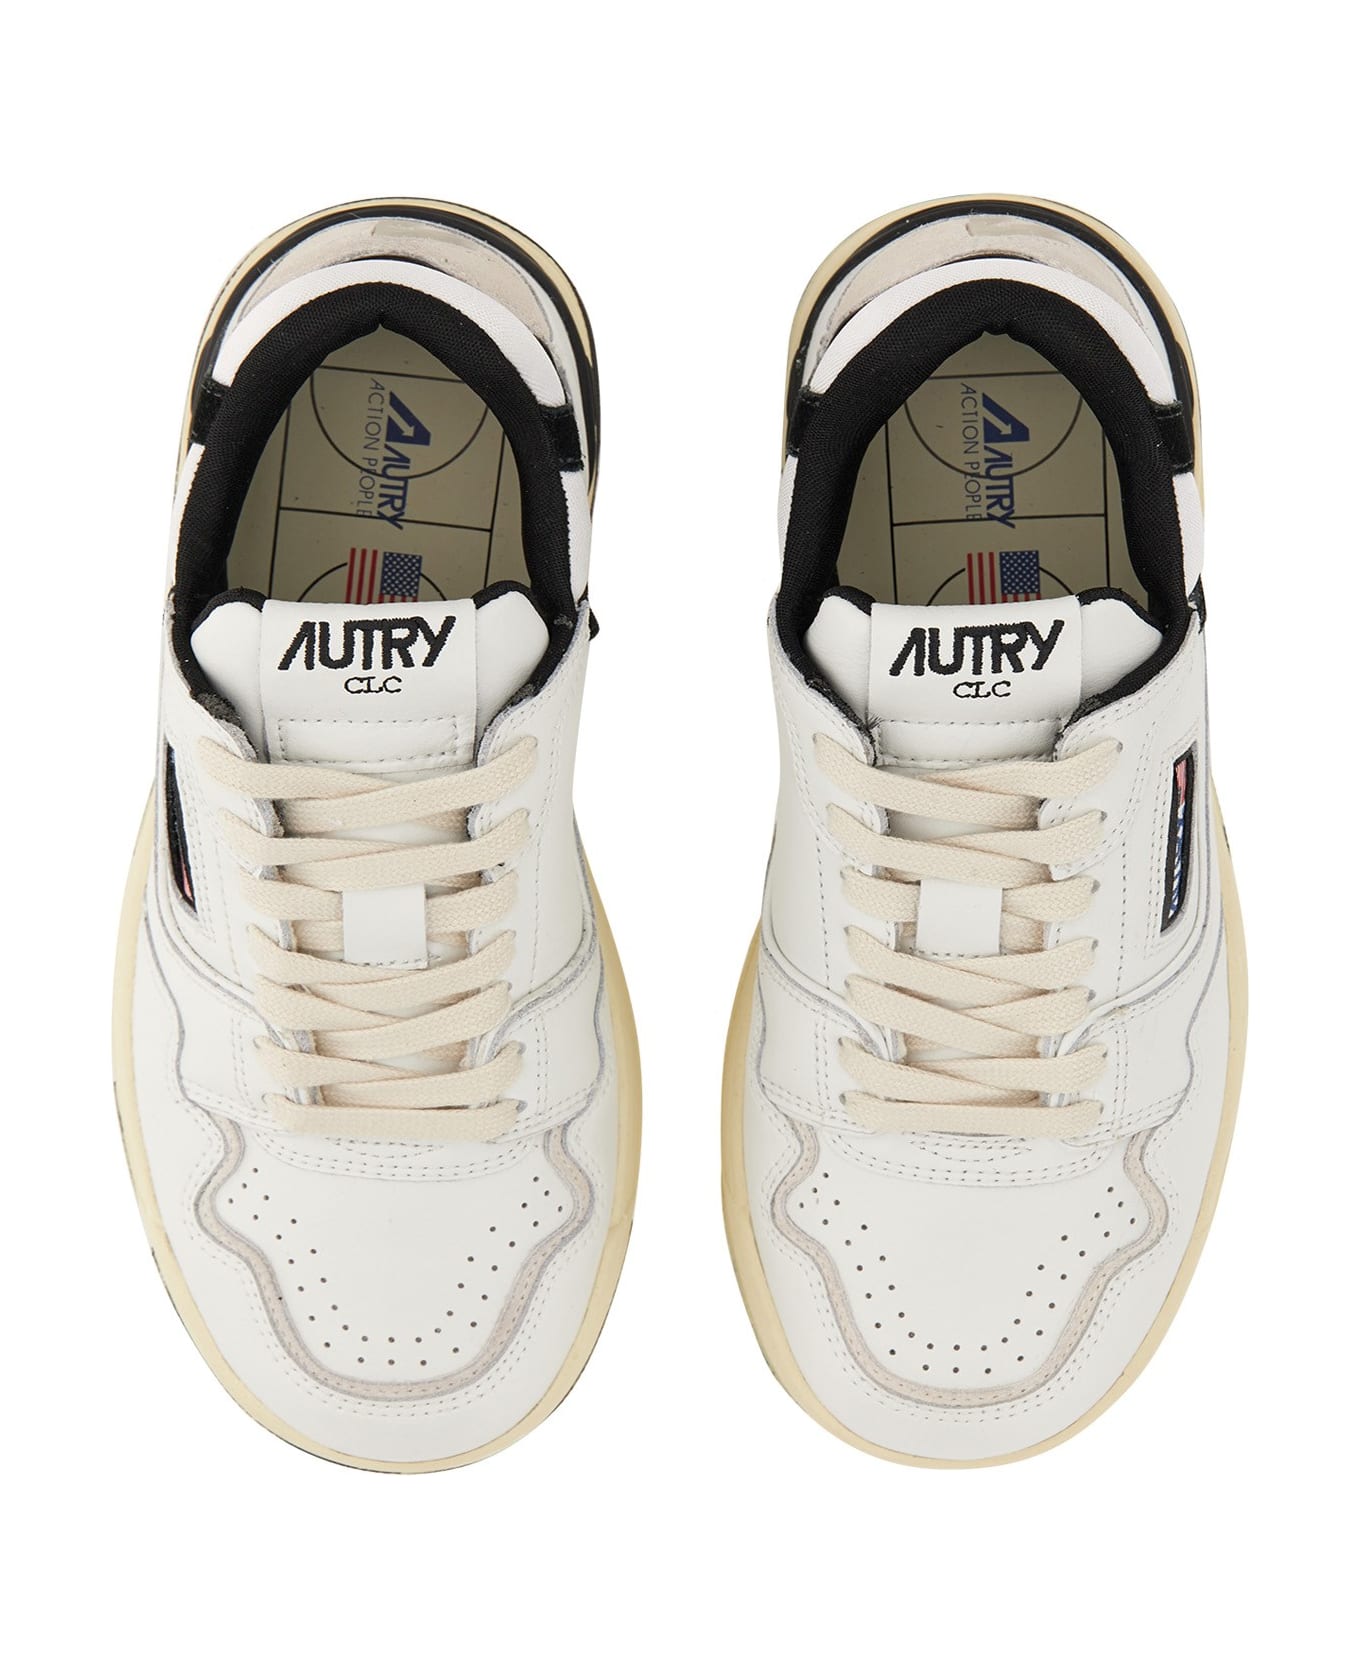 Autry Clc Low Sneakers - BIANCO スニーカー